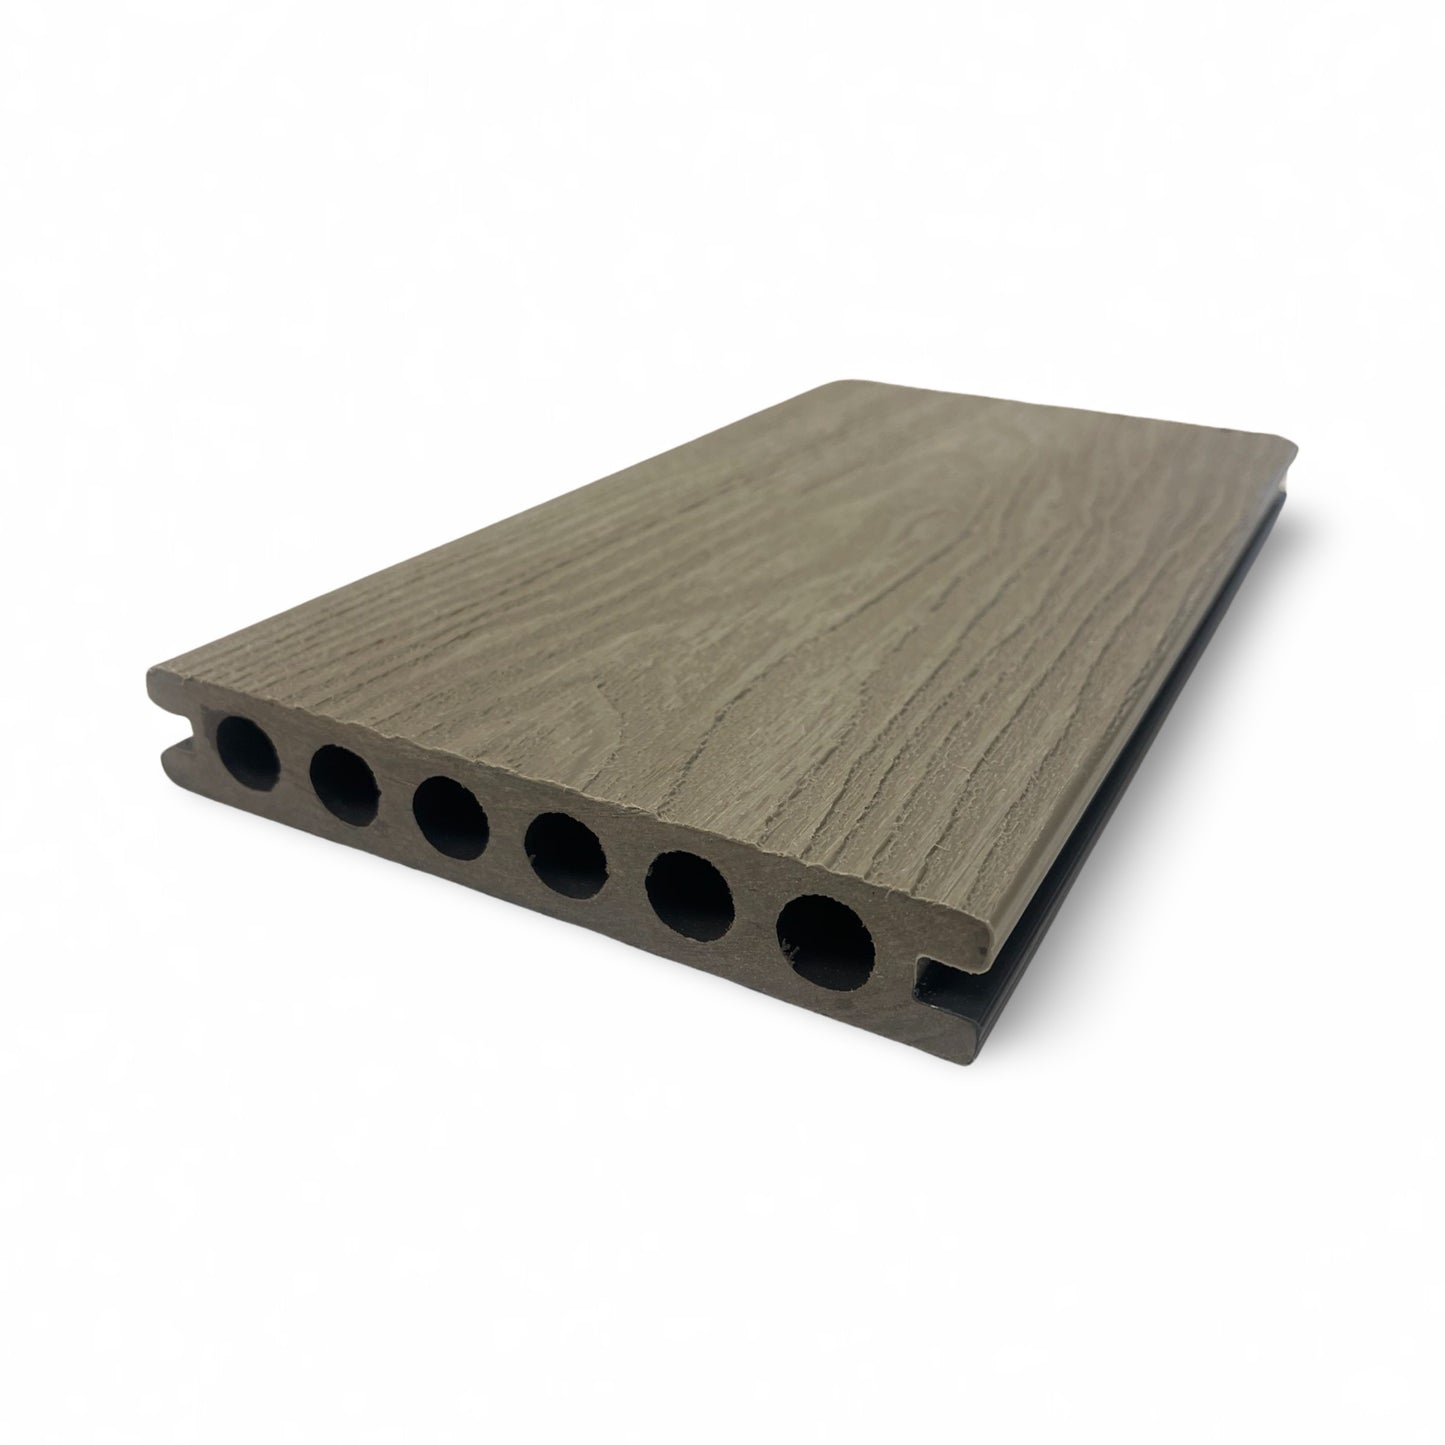 DUAL sided 3.6m Capped Decking